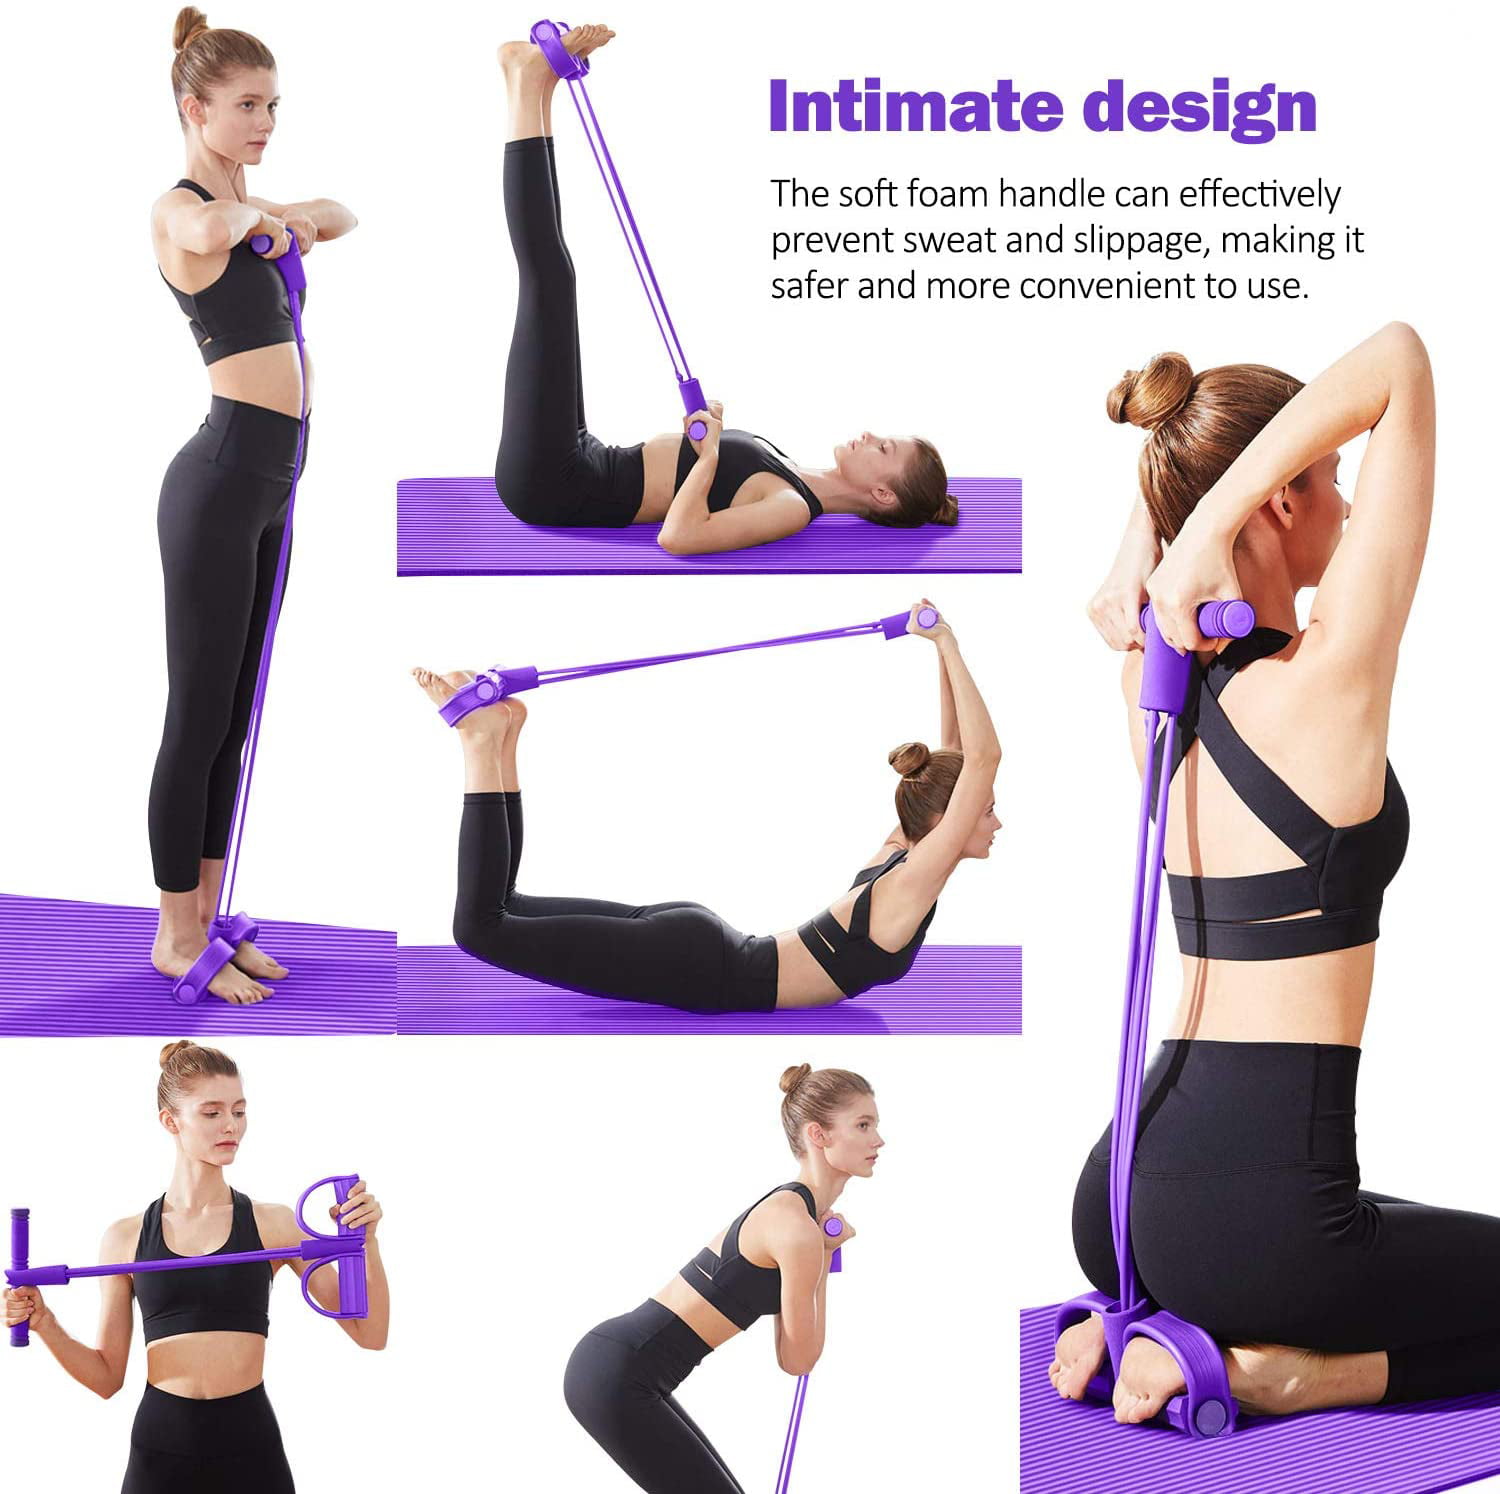 Workout Equipment for Home KPX Thick Yoga Mat 3 Piece Set Pilates 1 Pedal Resistance Band Include 1 Yoga Excersize Mat with Carrying Strap Exercise Gym 1 Yoga Pilates Ring Yoga